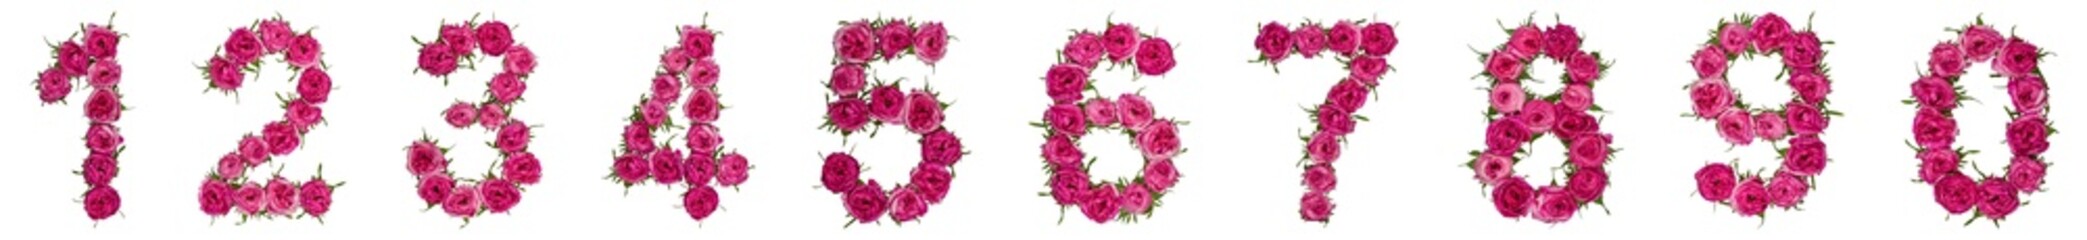 Set of arabic numbers from natural red flowers of roses, isolated on white background